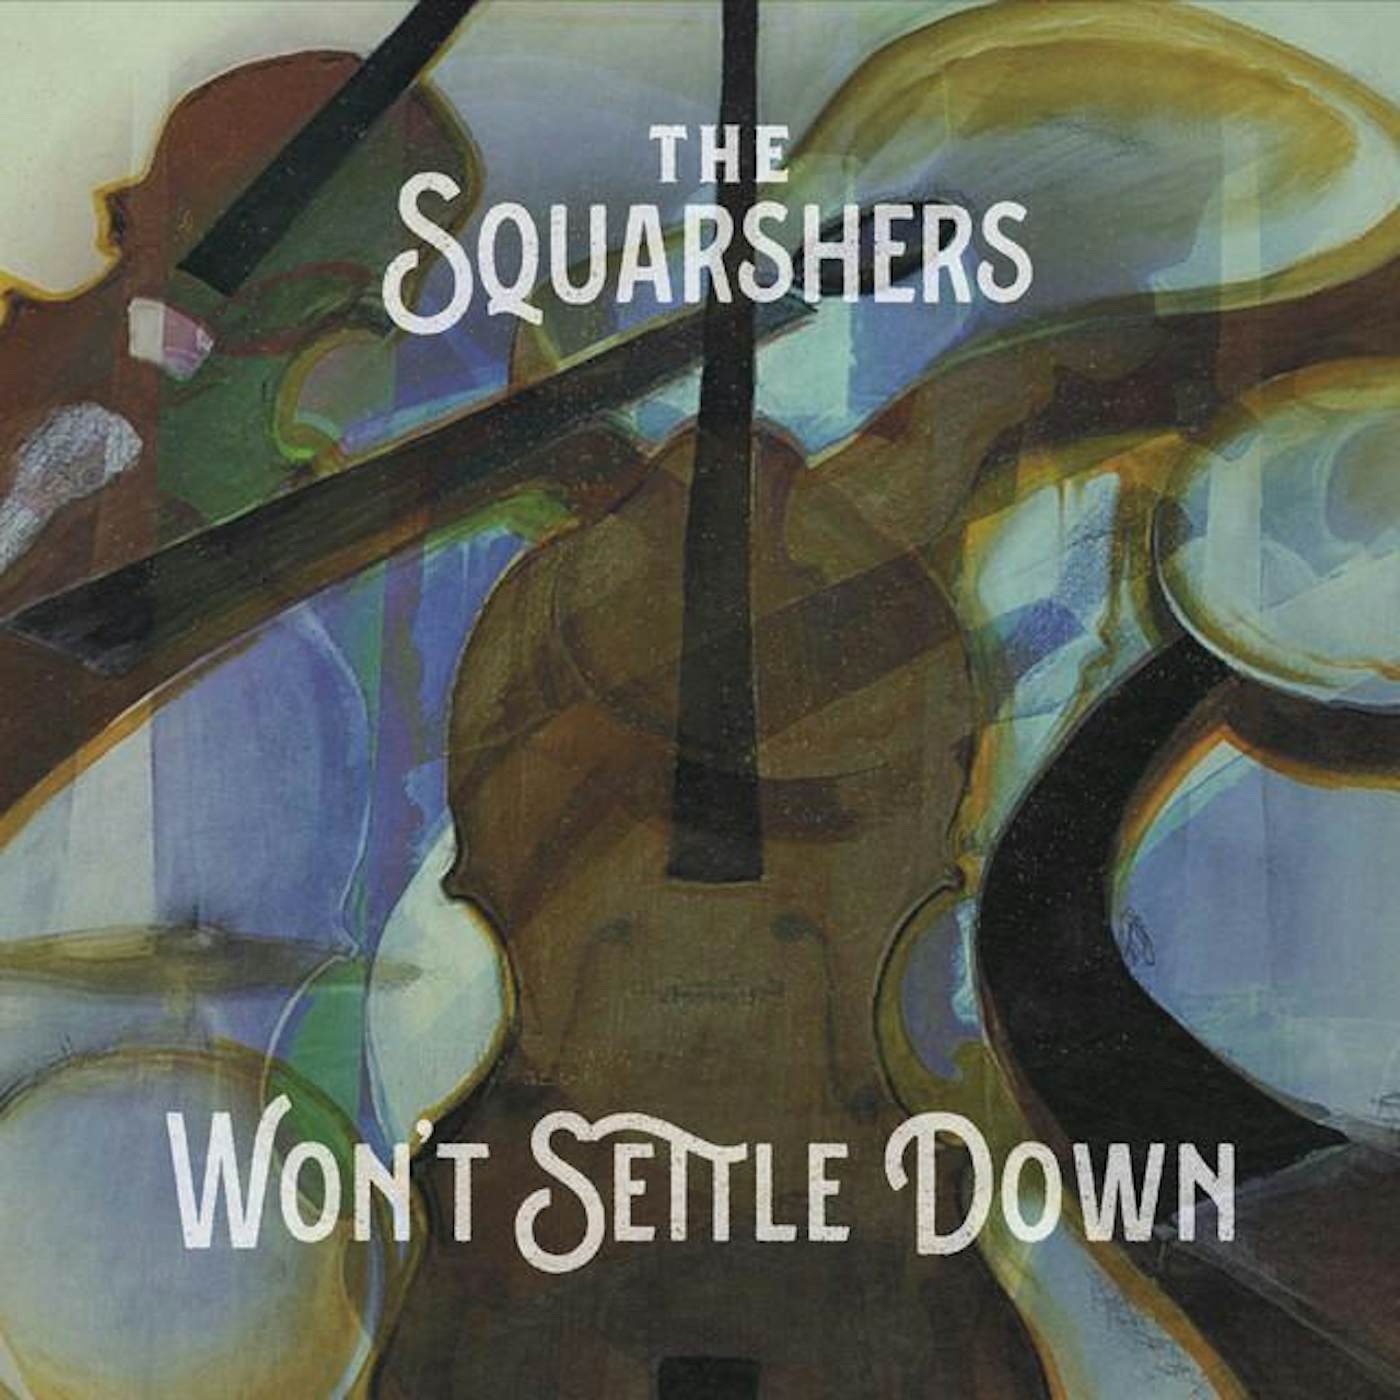 The Squarshers